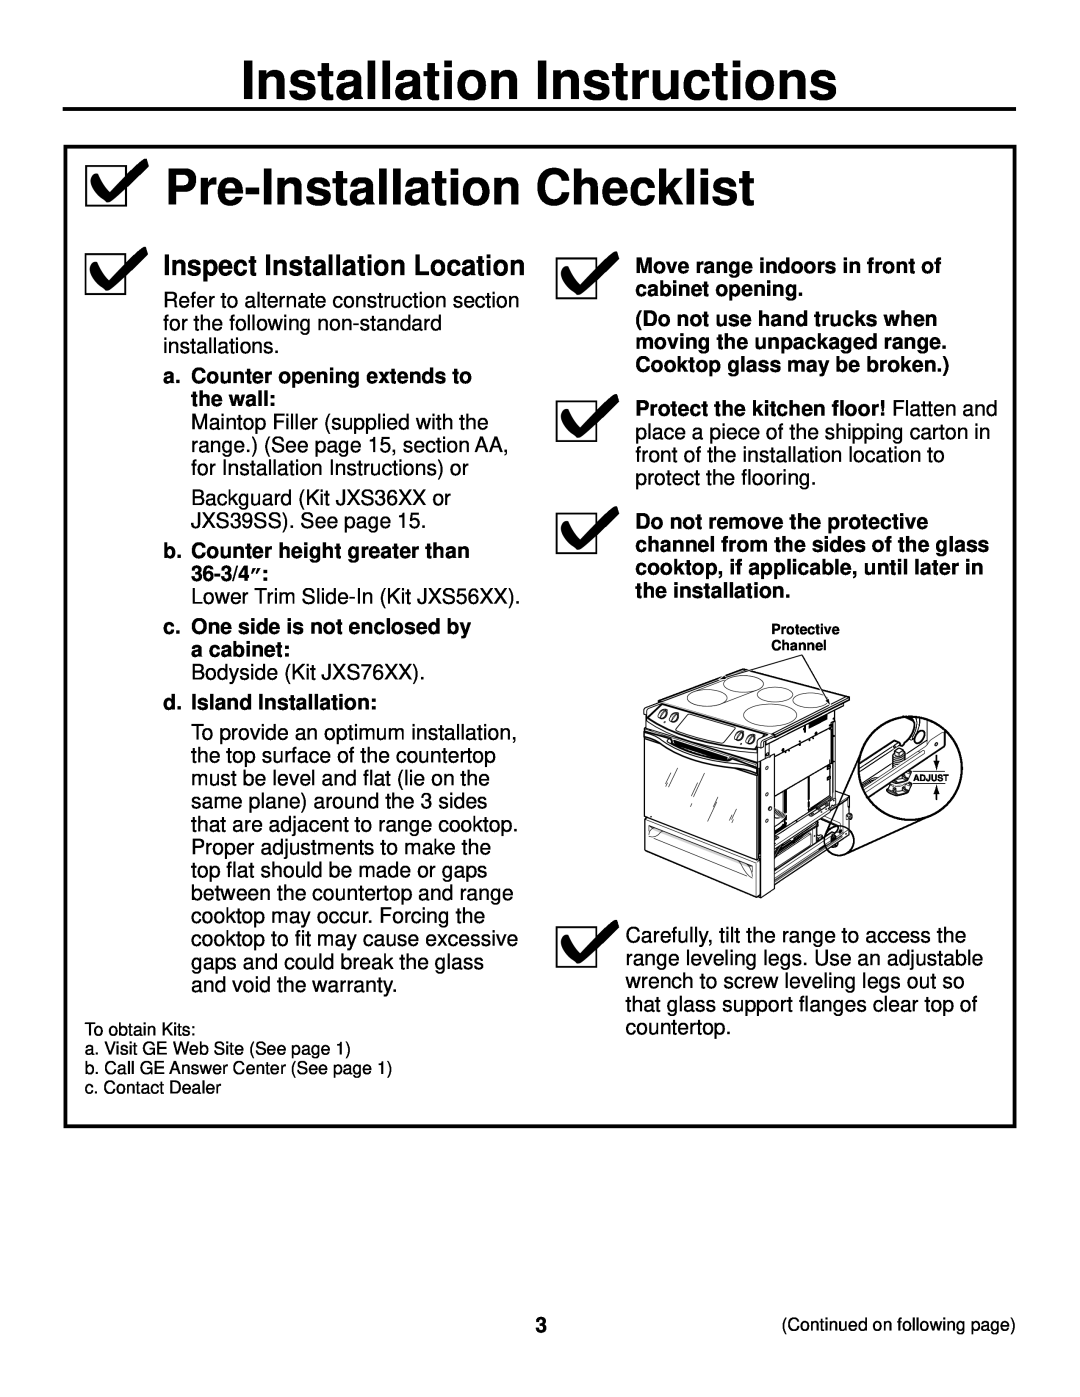 GE JS905 Pre-Installation Checklist, Inspect Installation Location, a. Counter opening extends to the wall 